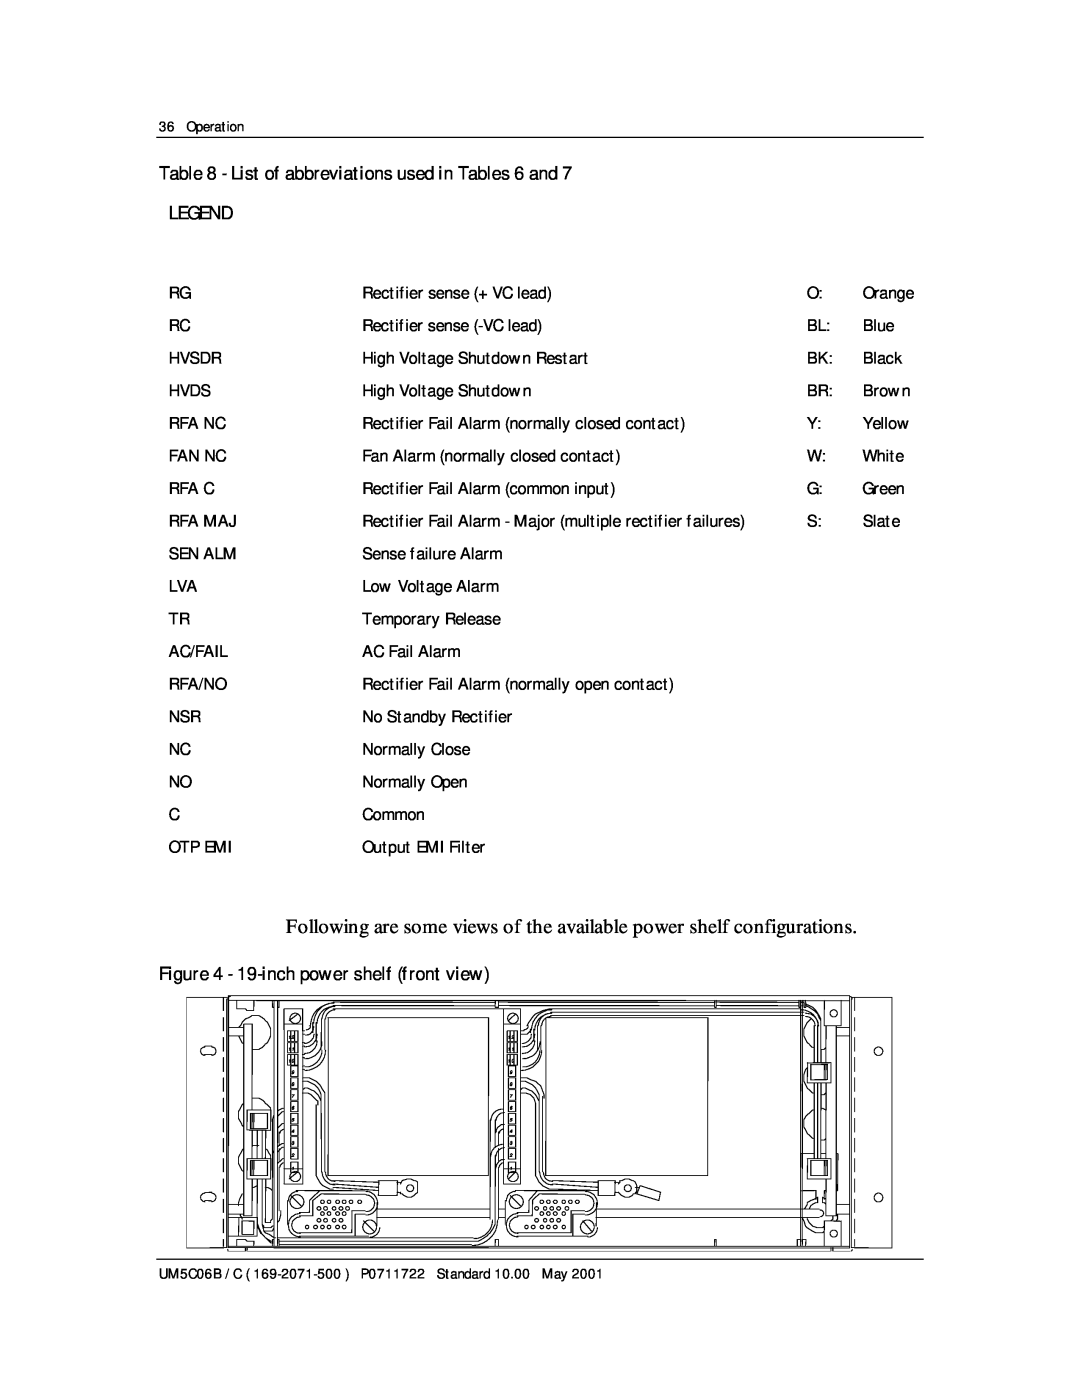 Emerson MPR15 Series, MPR25 user manual List of abbreviations used in Tables 6 and, 19-inch power shelf front view 